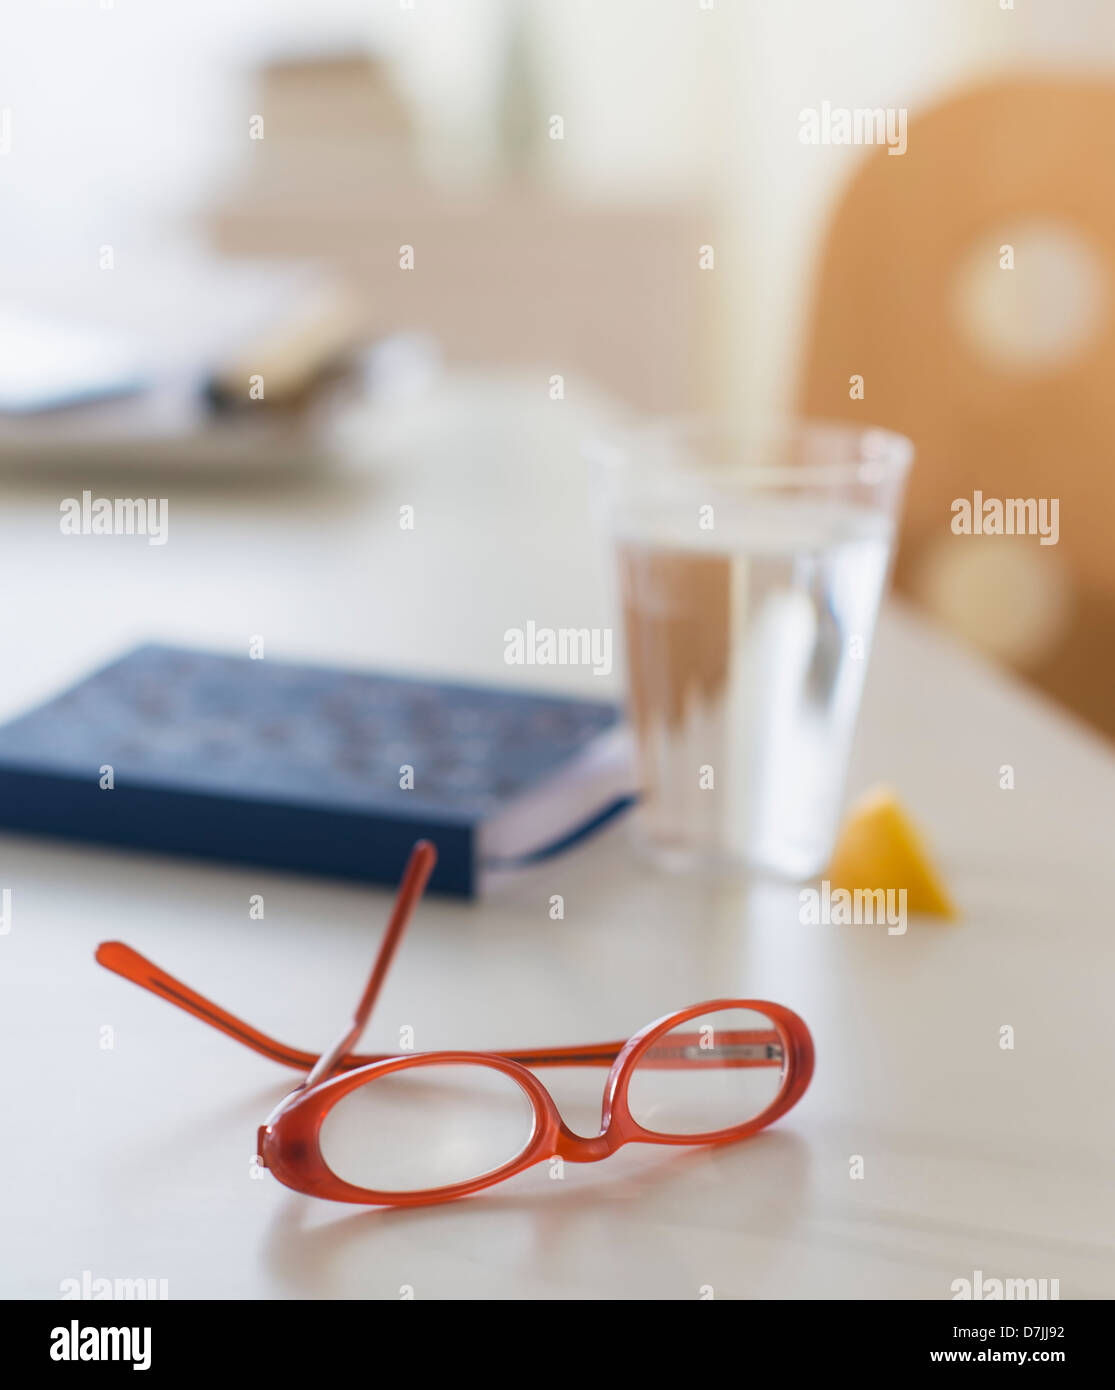 View of spectacles, personal organizer and glass of water on table Stock Photo